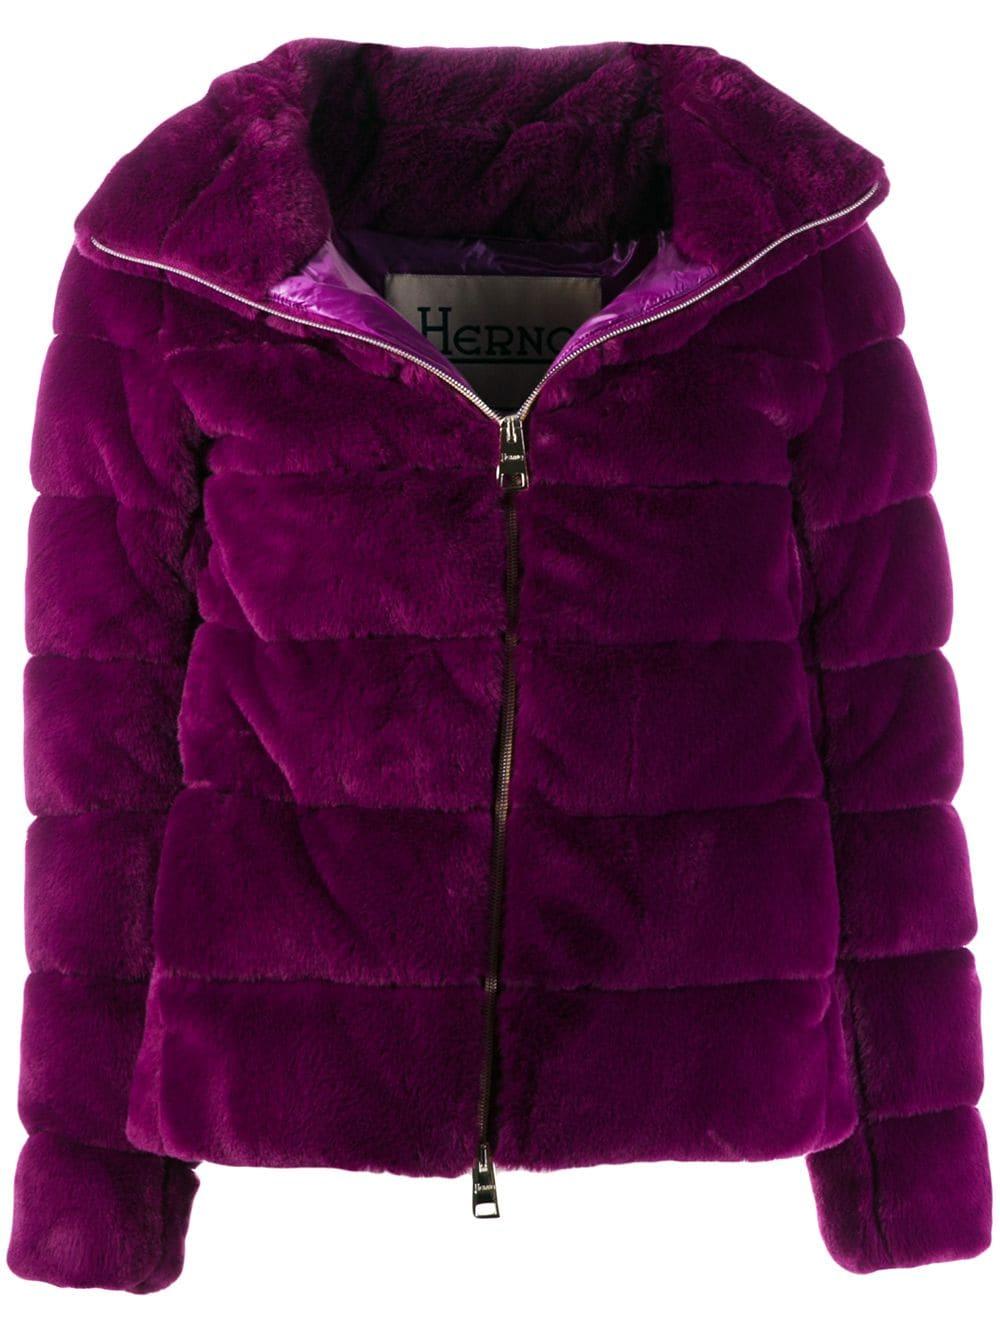 Herno Quilted Faux-fur Jacket in Purple - Lyst